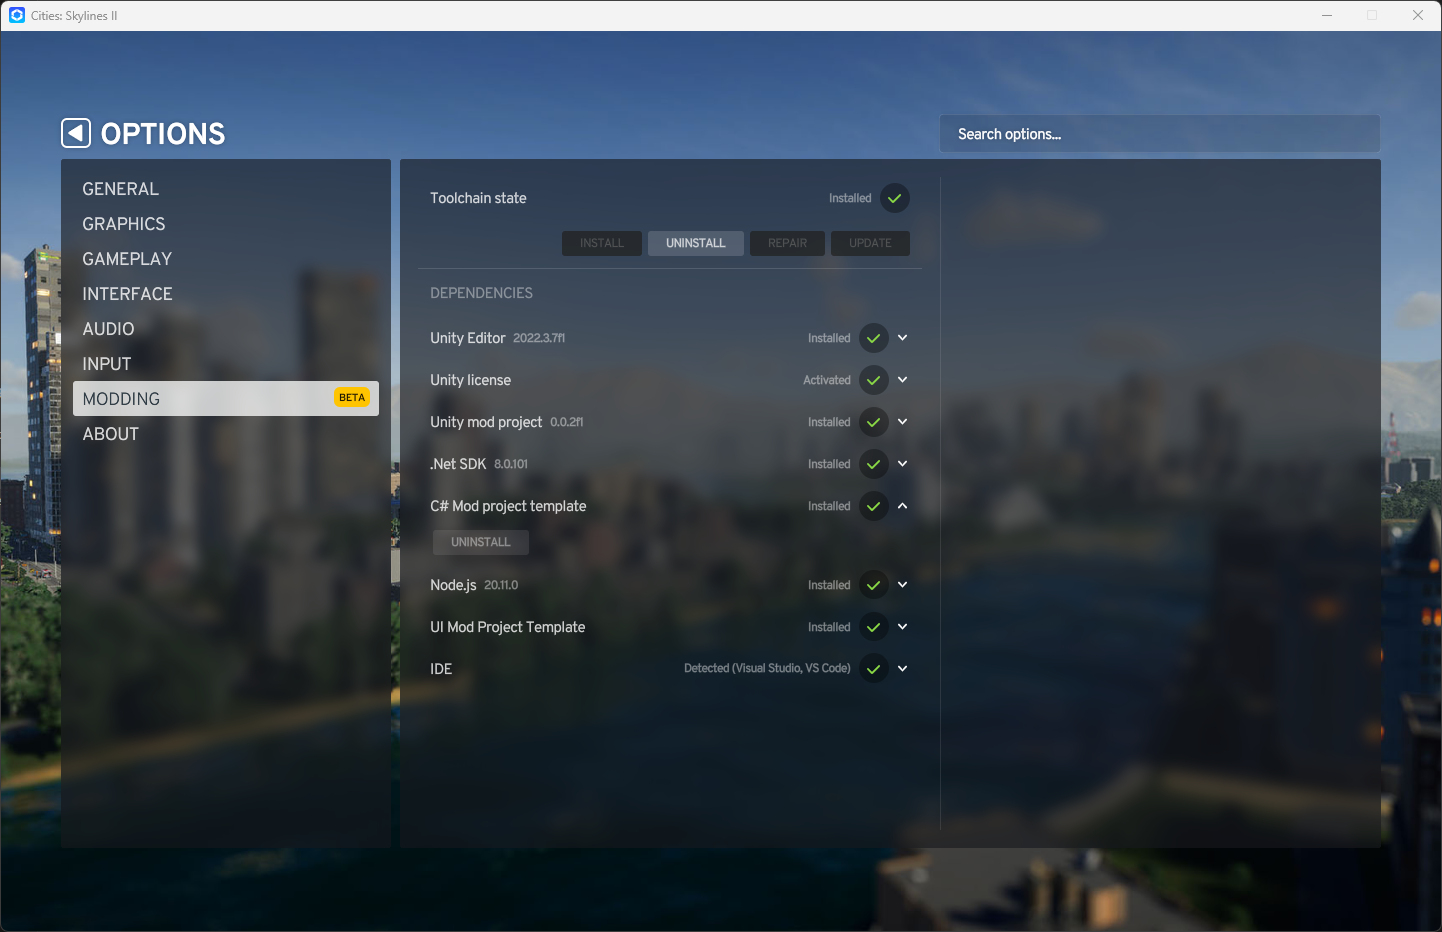 Cities: Skylines 2 modding in-game dependency checklist